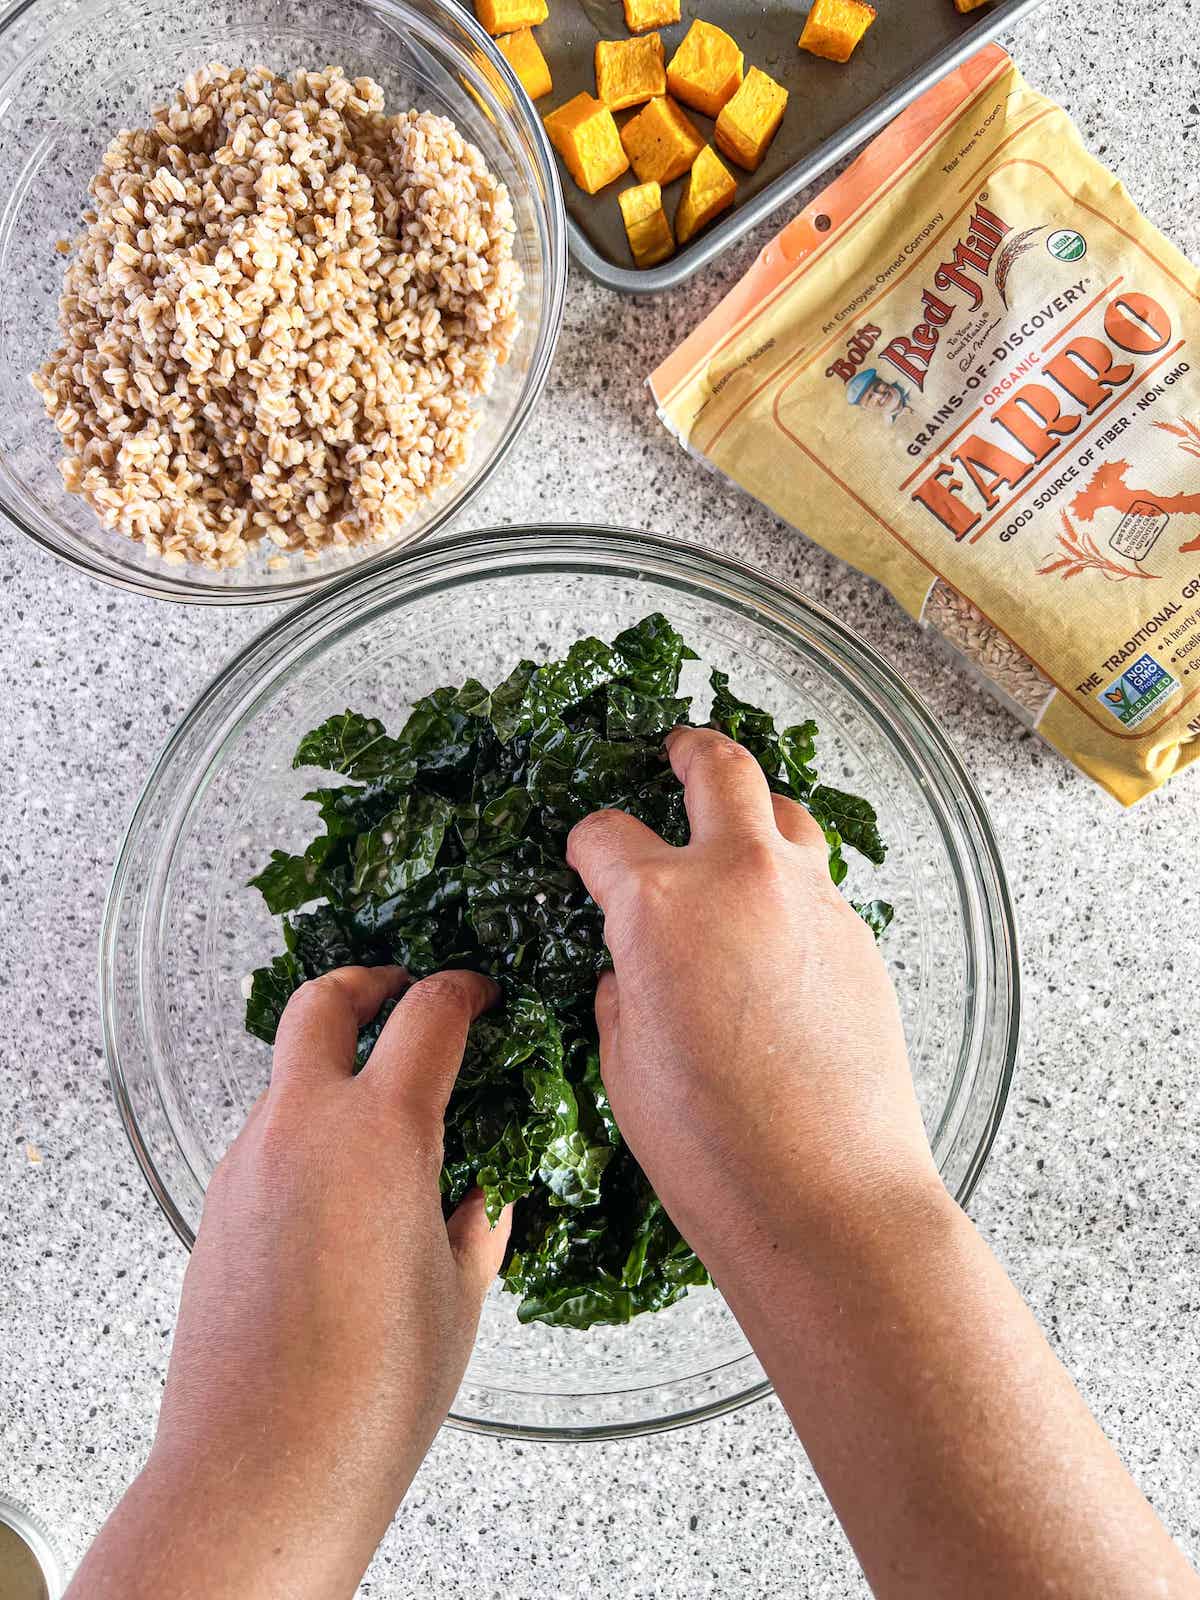 Brown hands massaging kale in a glass bowl.